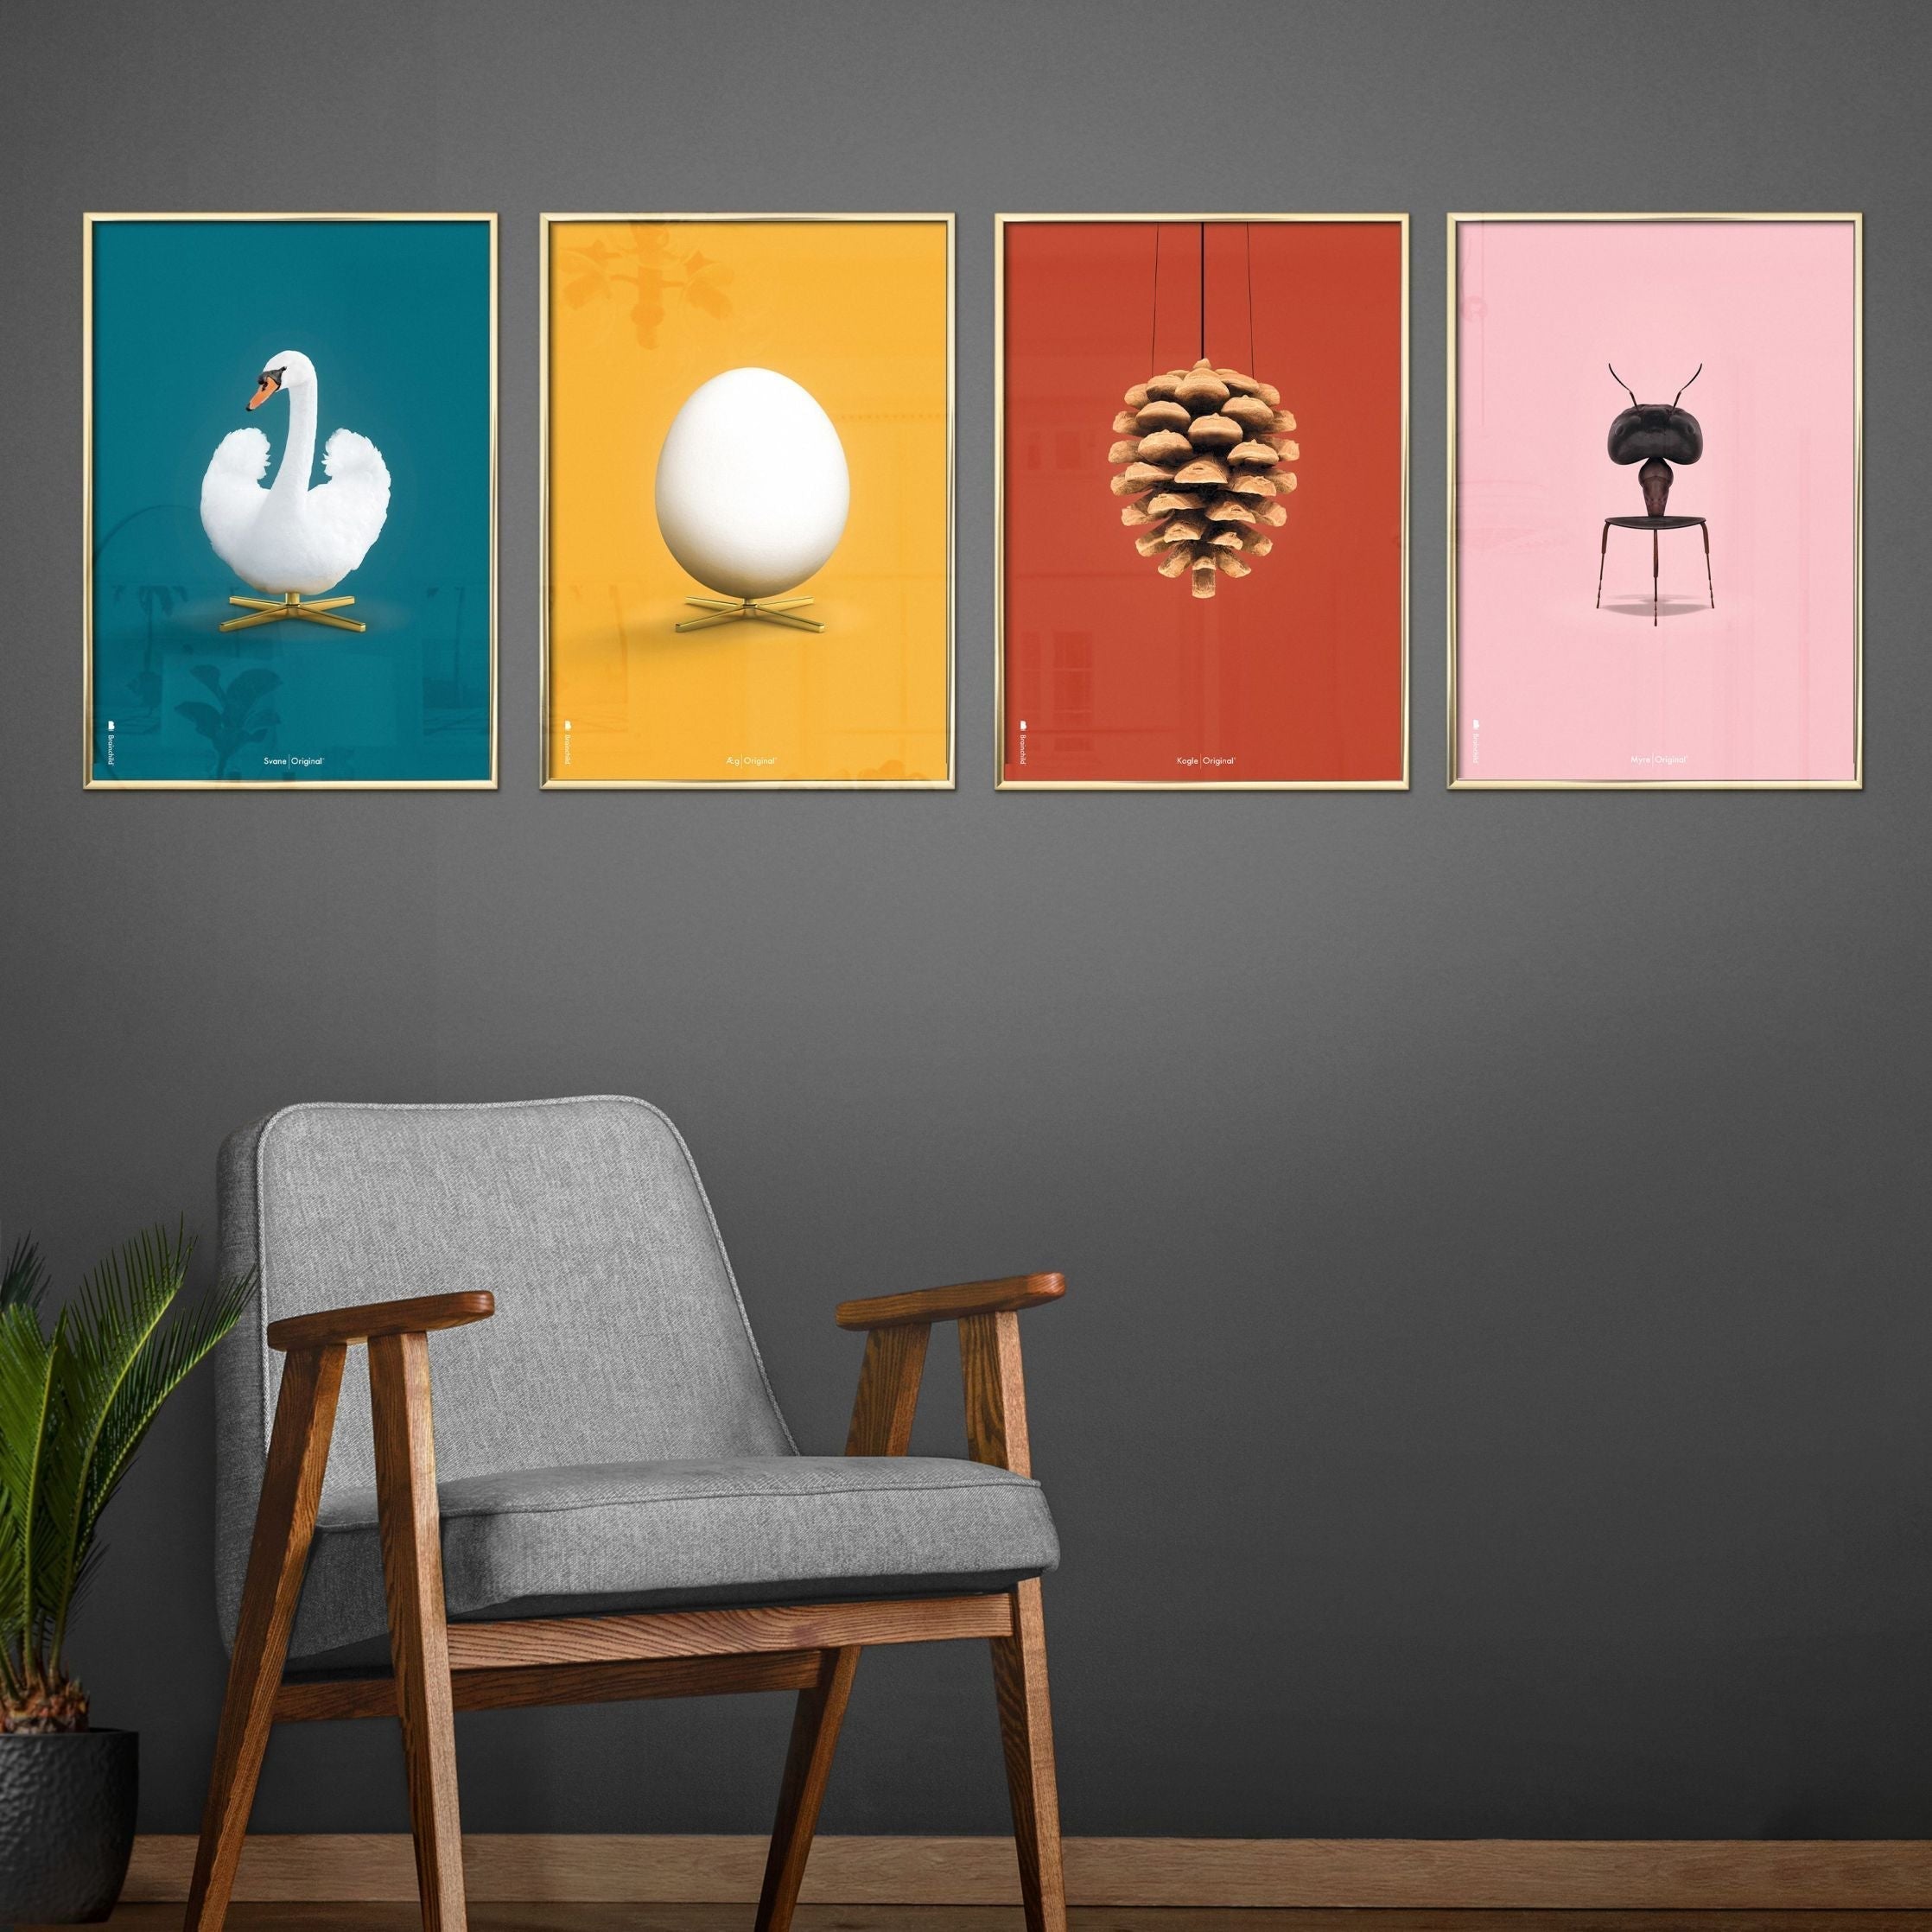 Brainchild Pine Cone Classic Poster, Frame In Black Lacquered Wood 30x40 Cm, Red Background